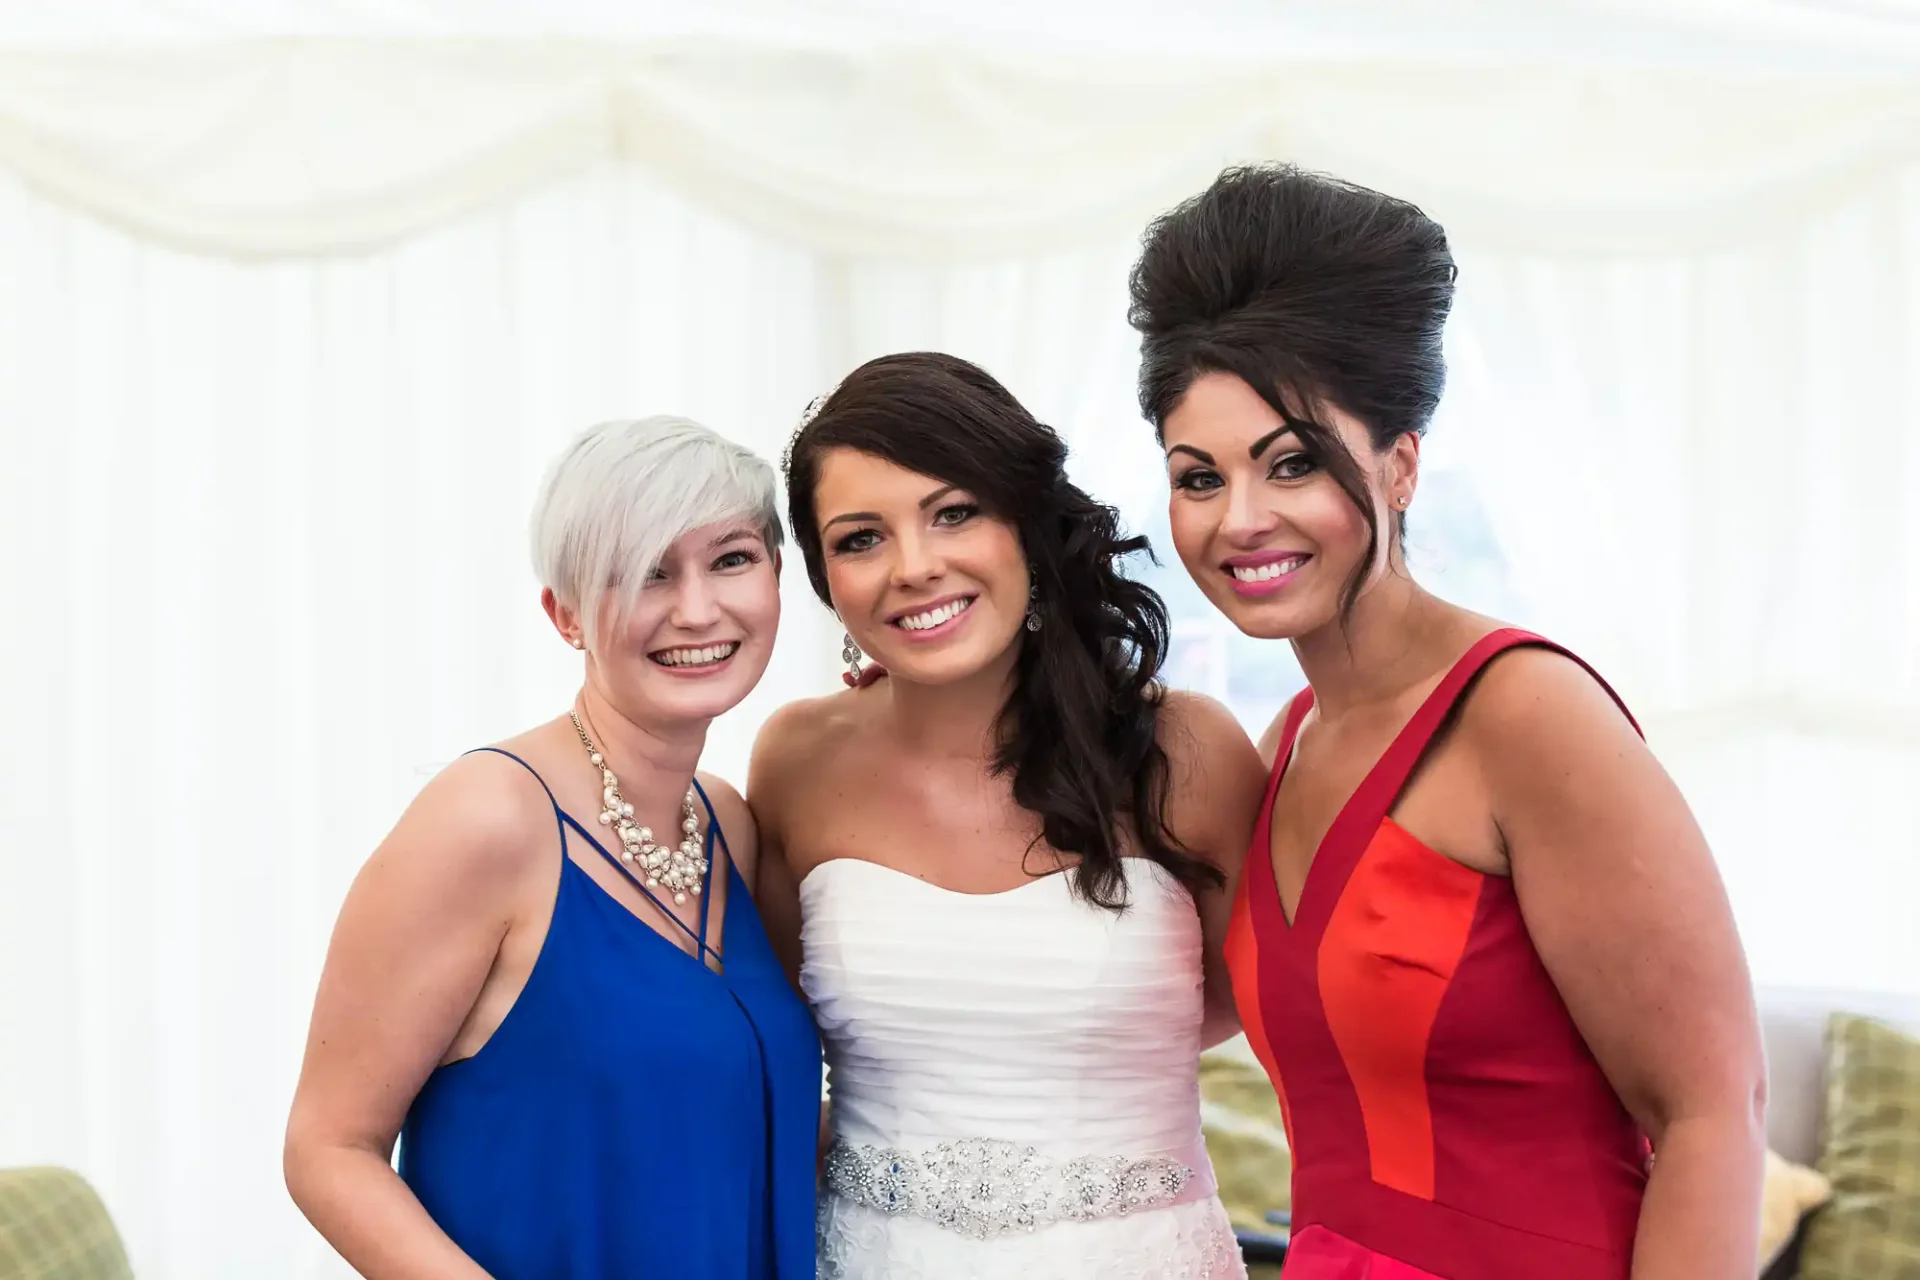 Three women smiling at a wedding, one in a white bridal gown and the others in blue and red dresses, inside a white tent.